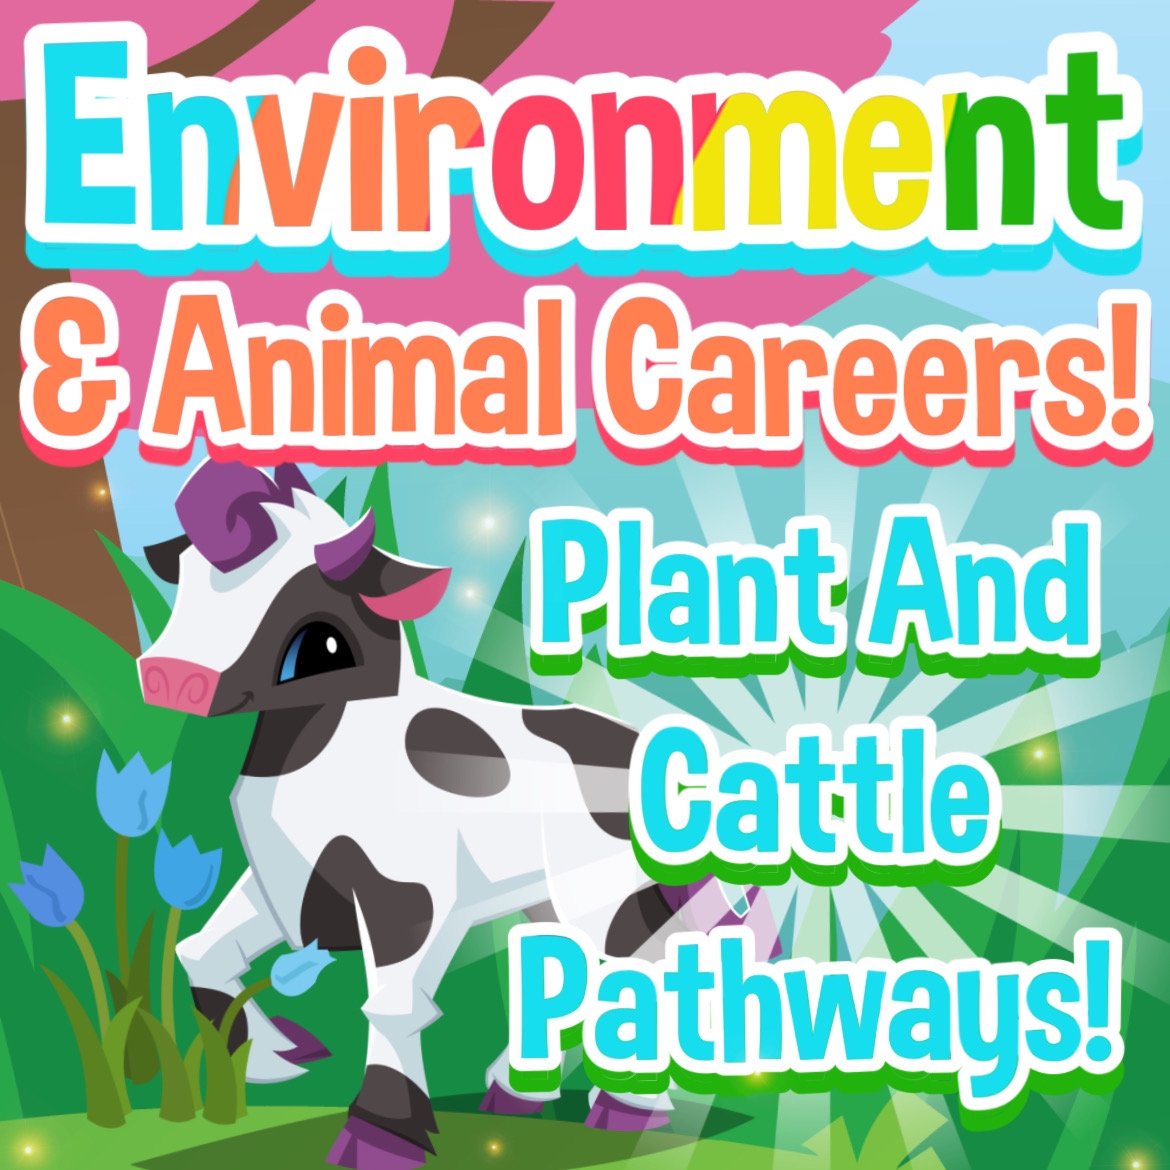 Environment &amp; Animal Careers - Plant/Cattle Pathways!